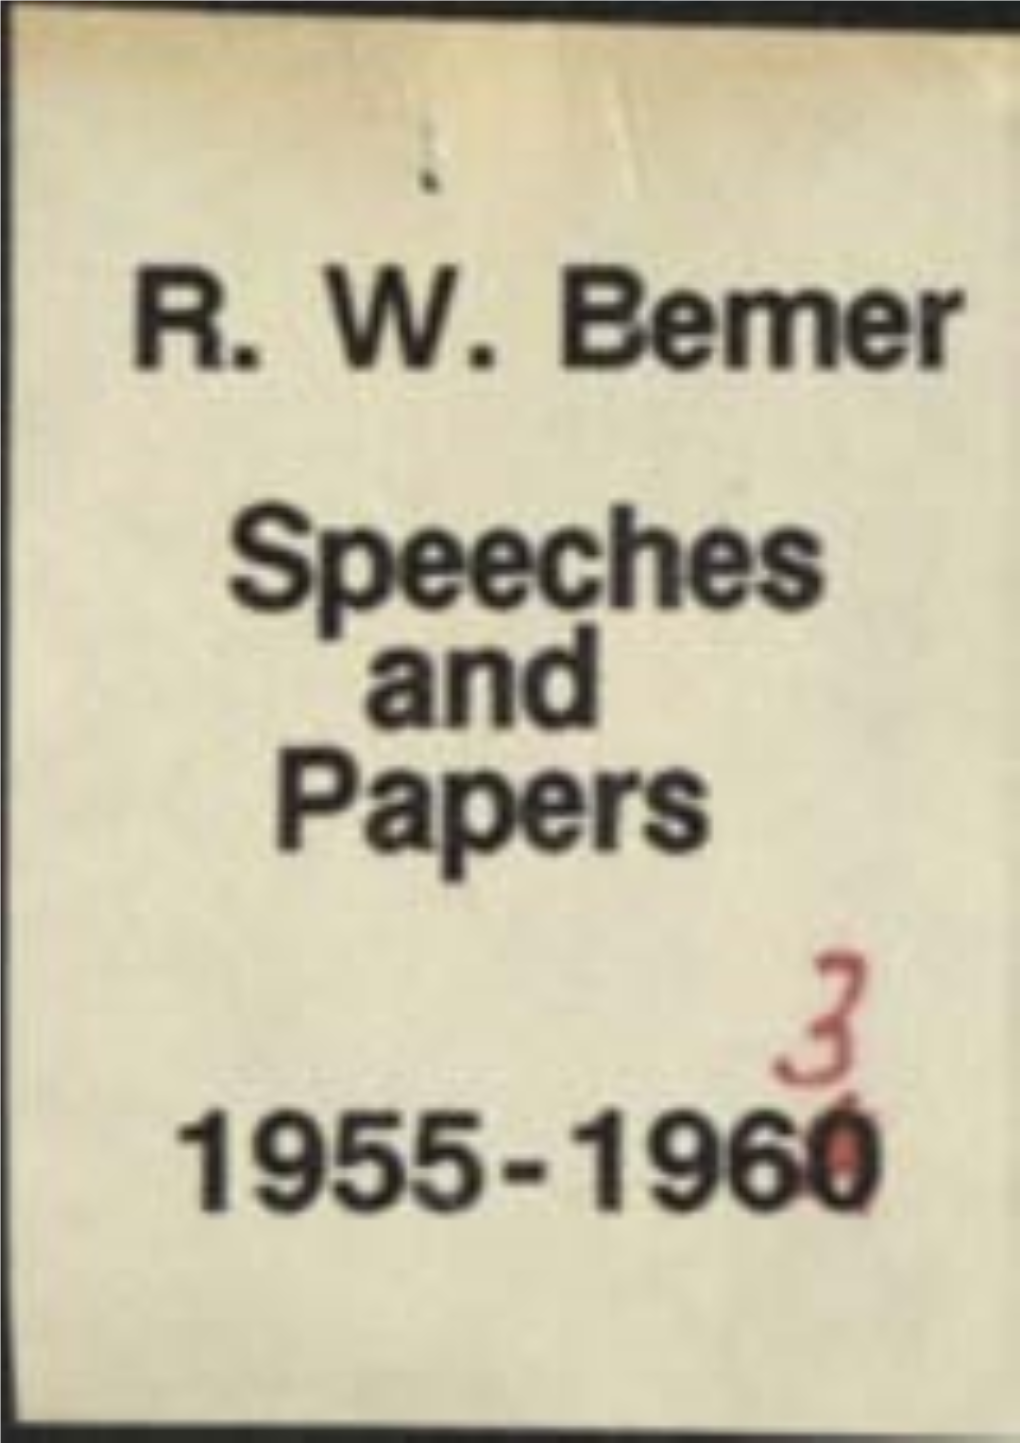 Speeches and Papers 3 1955-196# ASSOCIATION for COMPUTING MACHINERY 211 East I+3Rd Street New York 17, New York